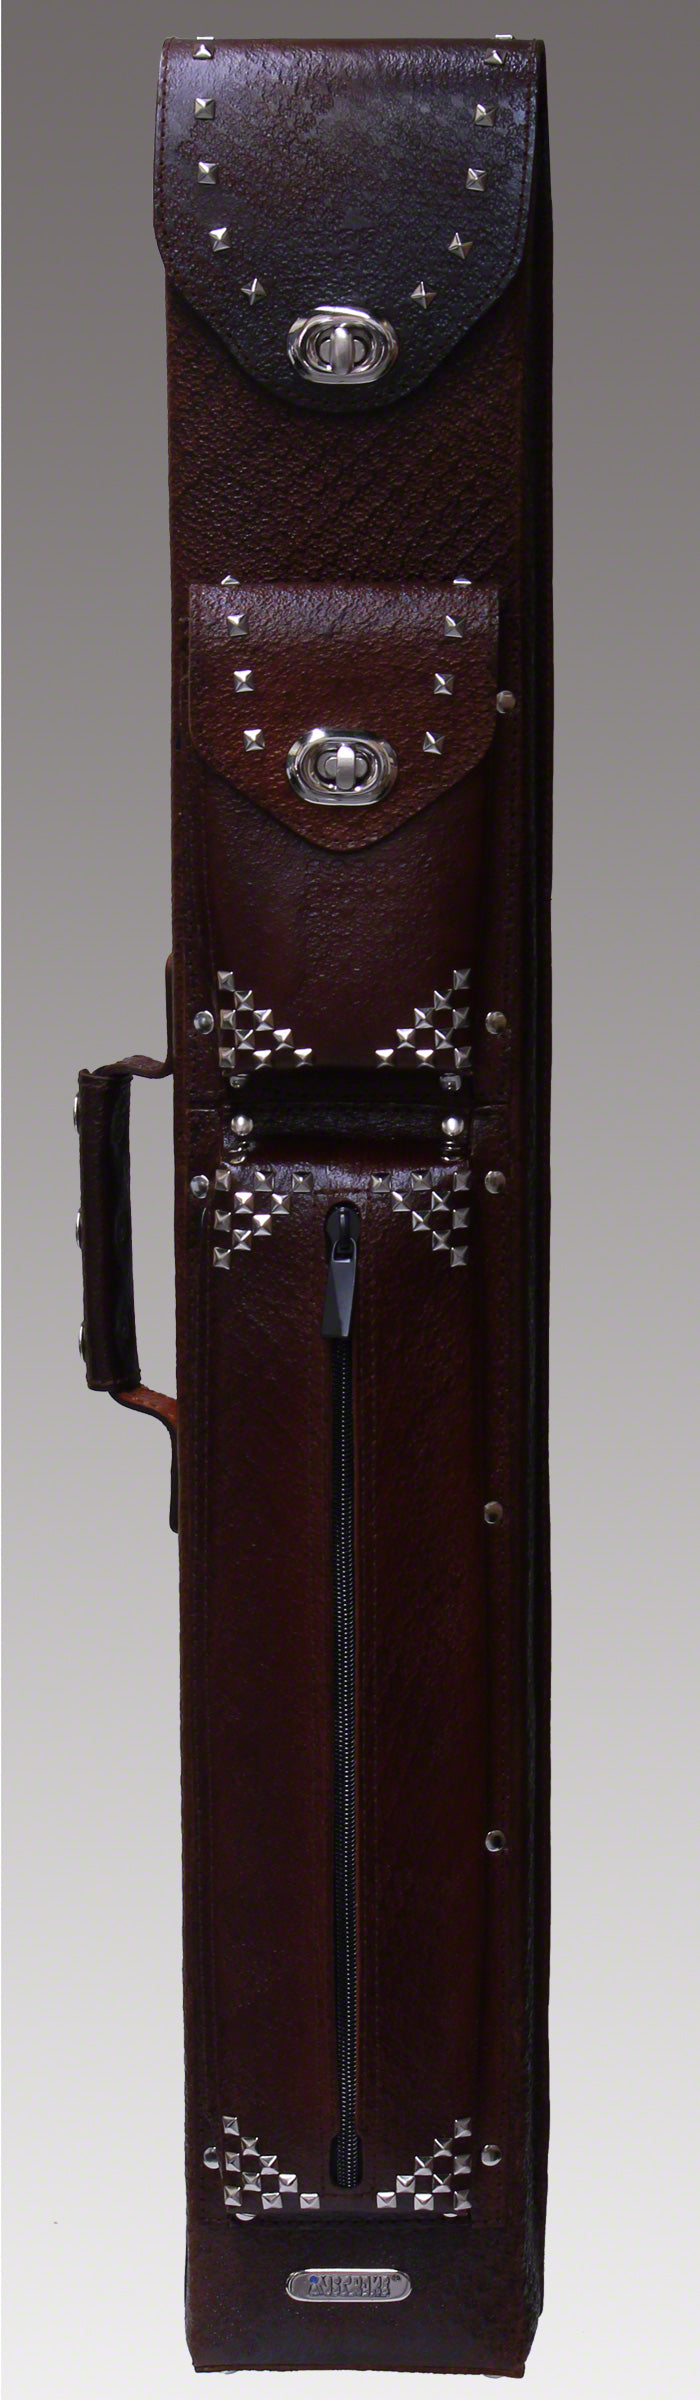 Instroke 2x4 FIT-C Brown Leather Pool Cue Case